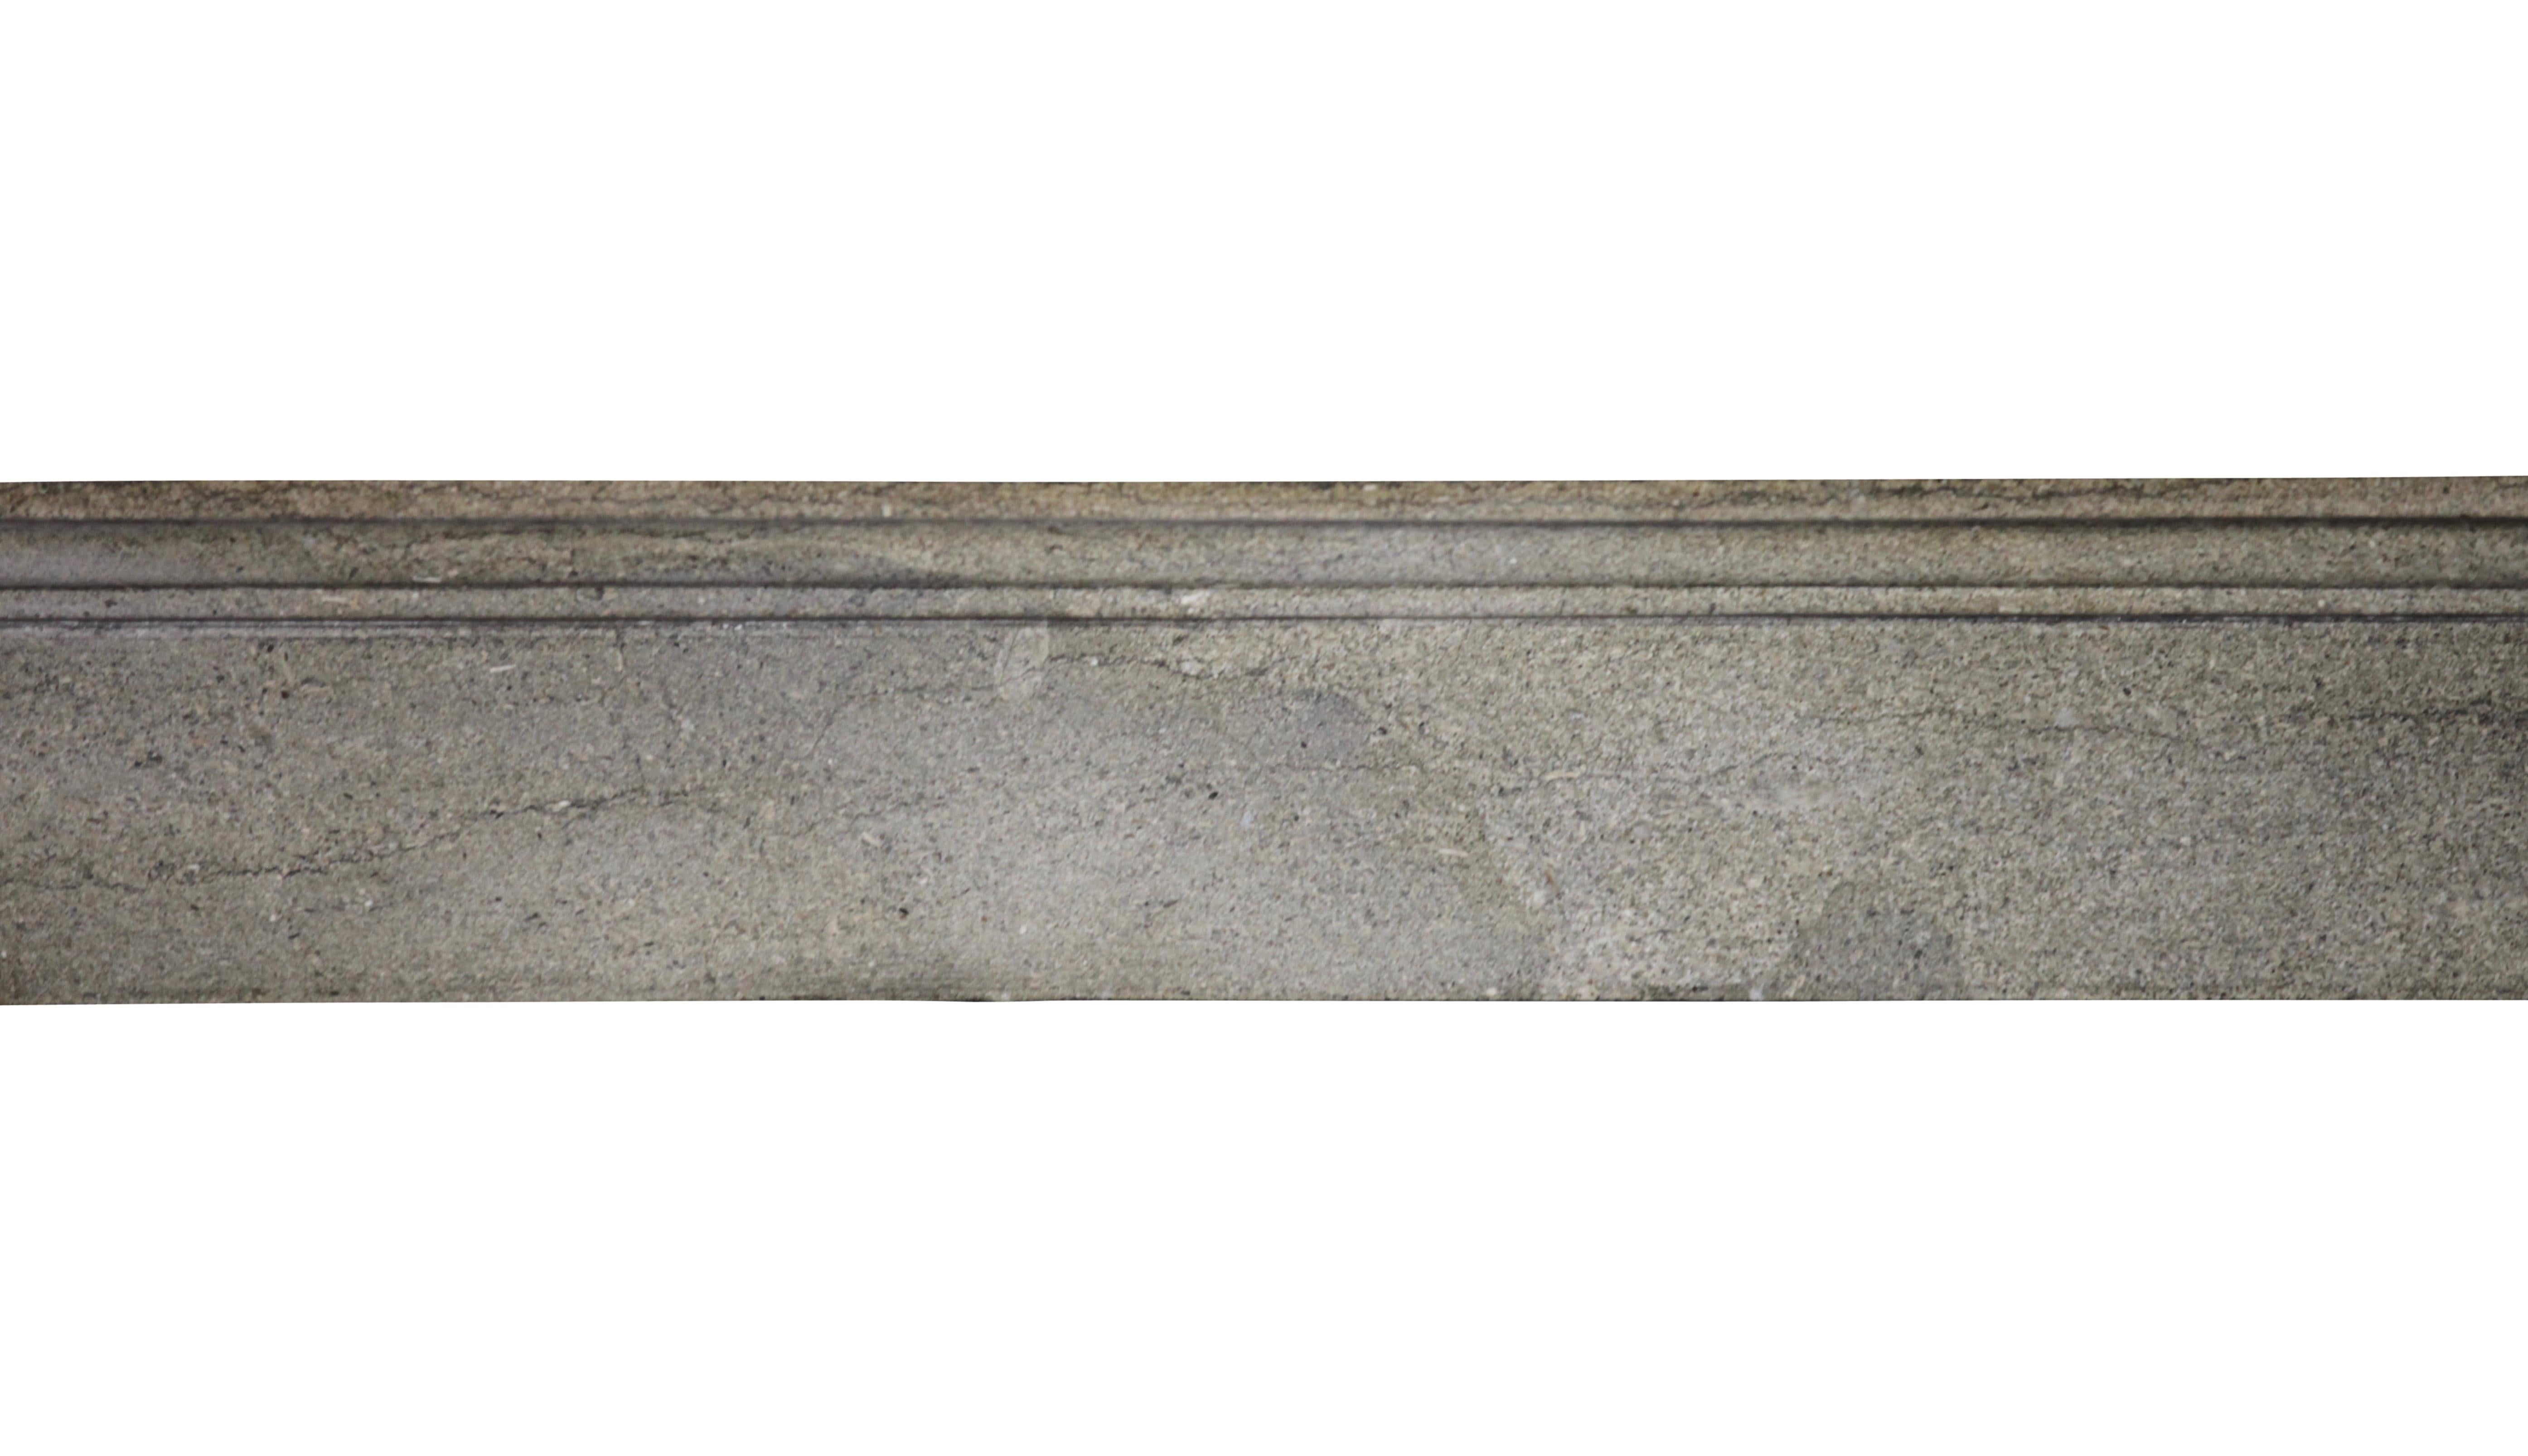 This a French Petite bourguignone fireplace surround in bicolor hard stone
It has a restauration on the top and right of the top shelf. Hard to notice and well restored. It is the kind of fireplace mantel we sell for apartment and timeless to